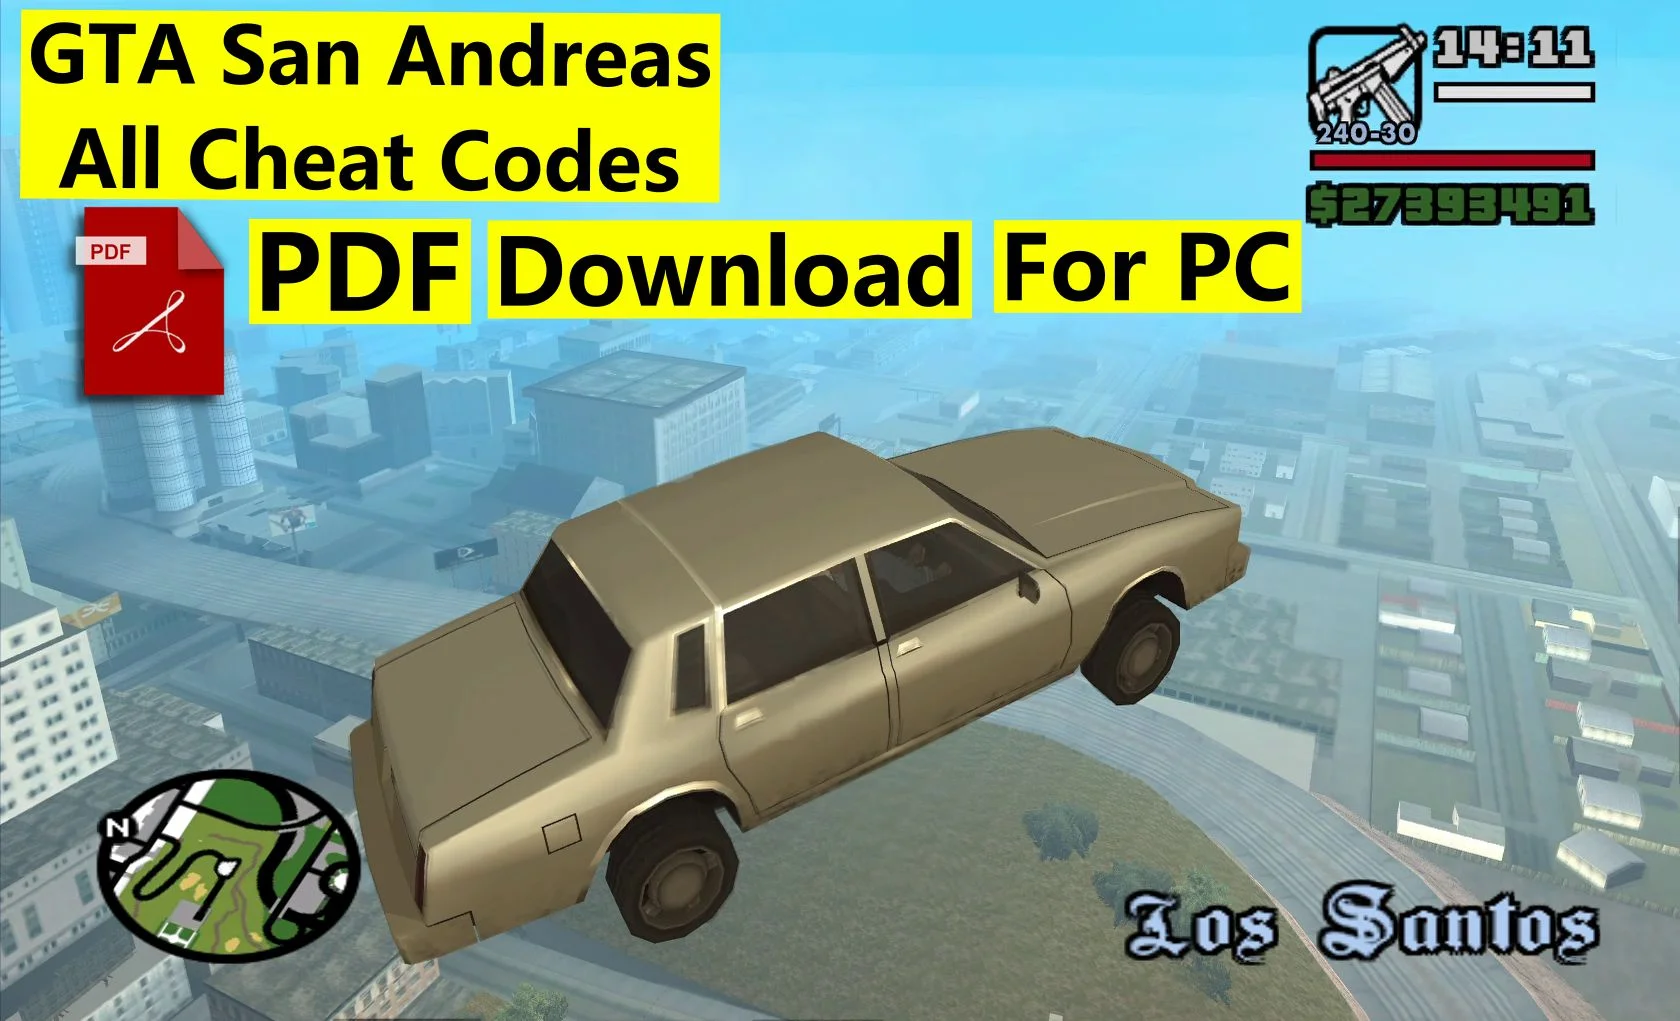 PC Cheats, PDF, Cheating In Video Games